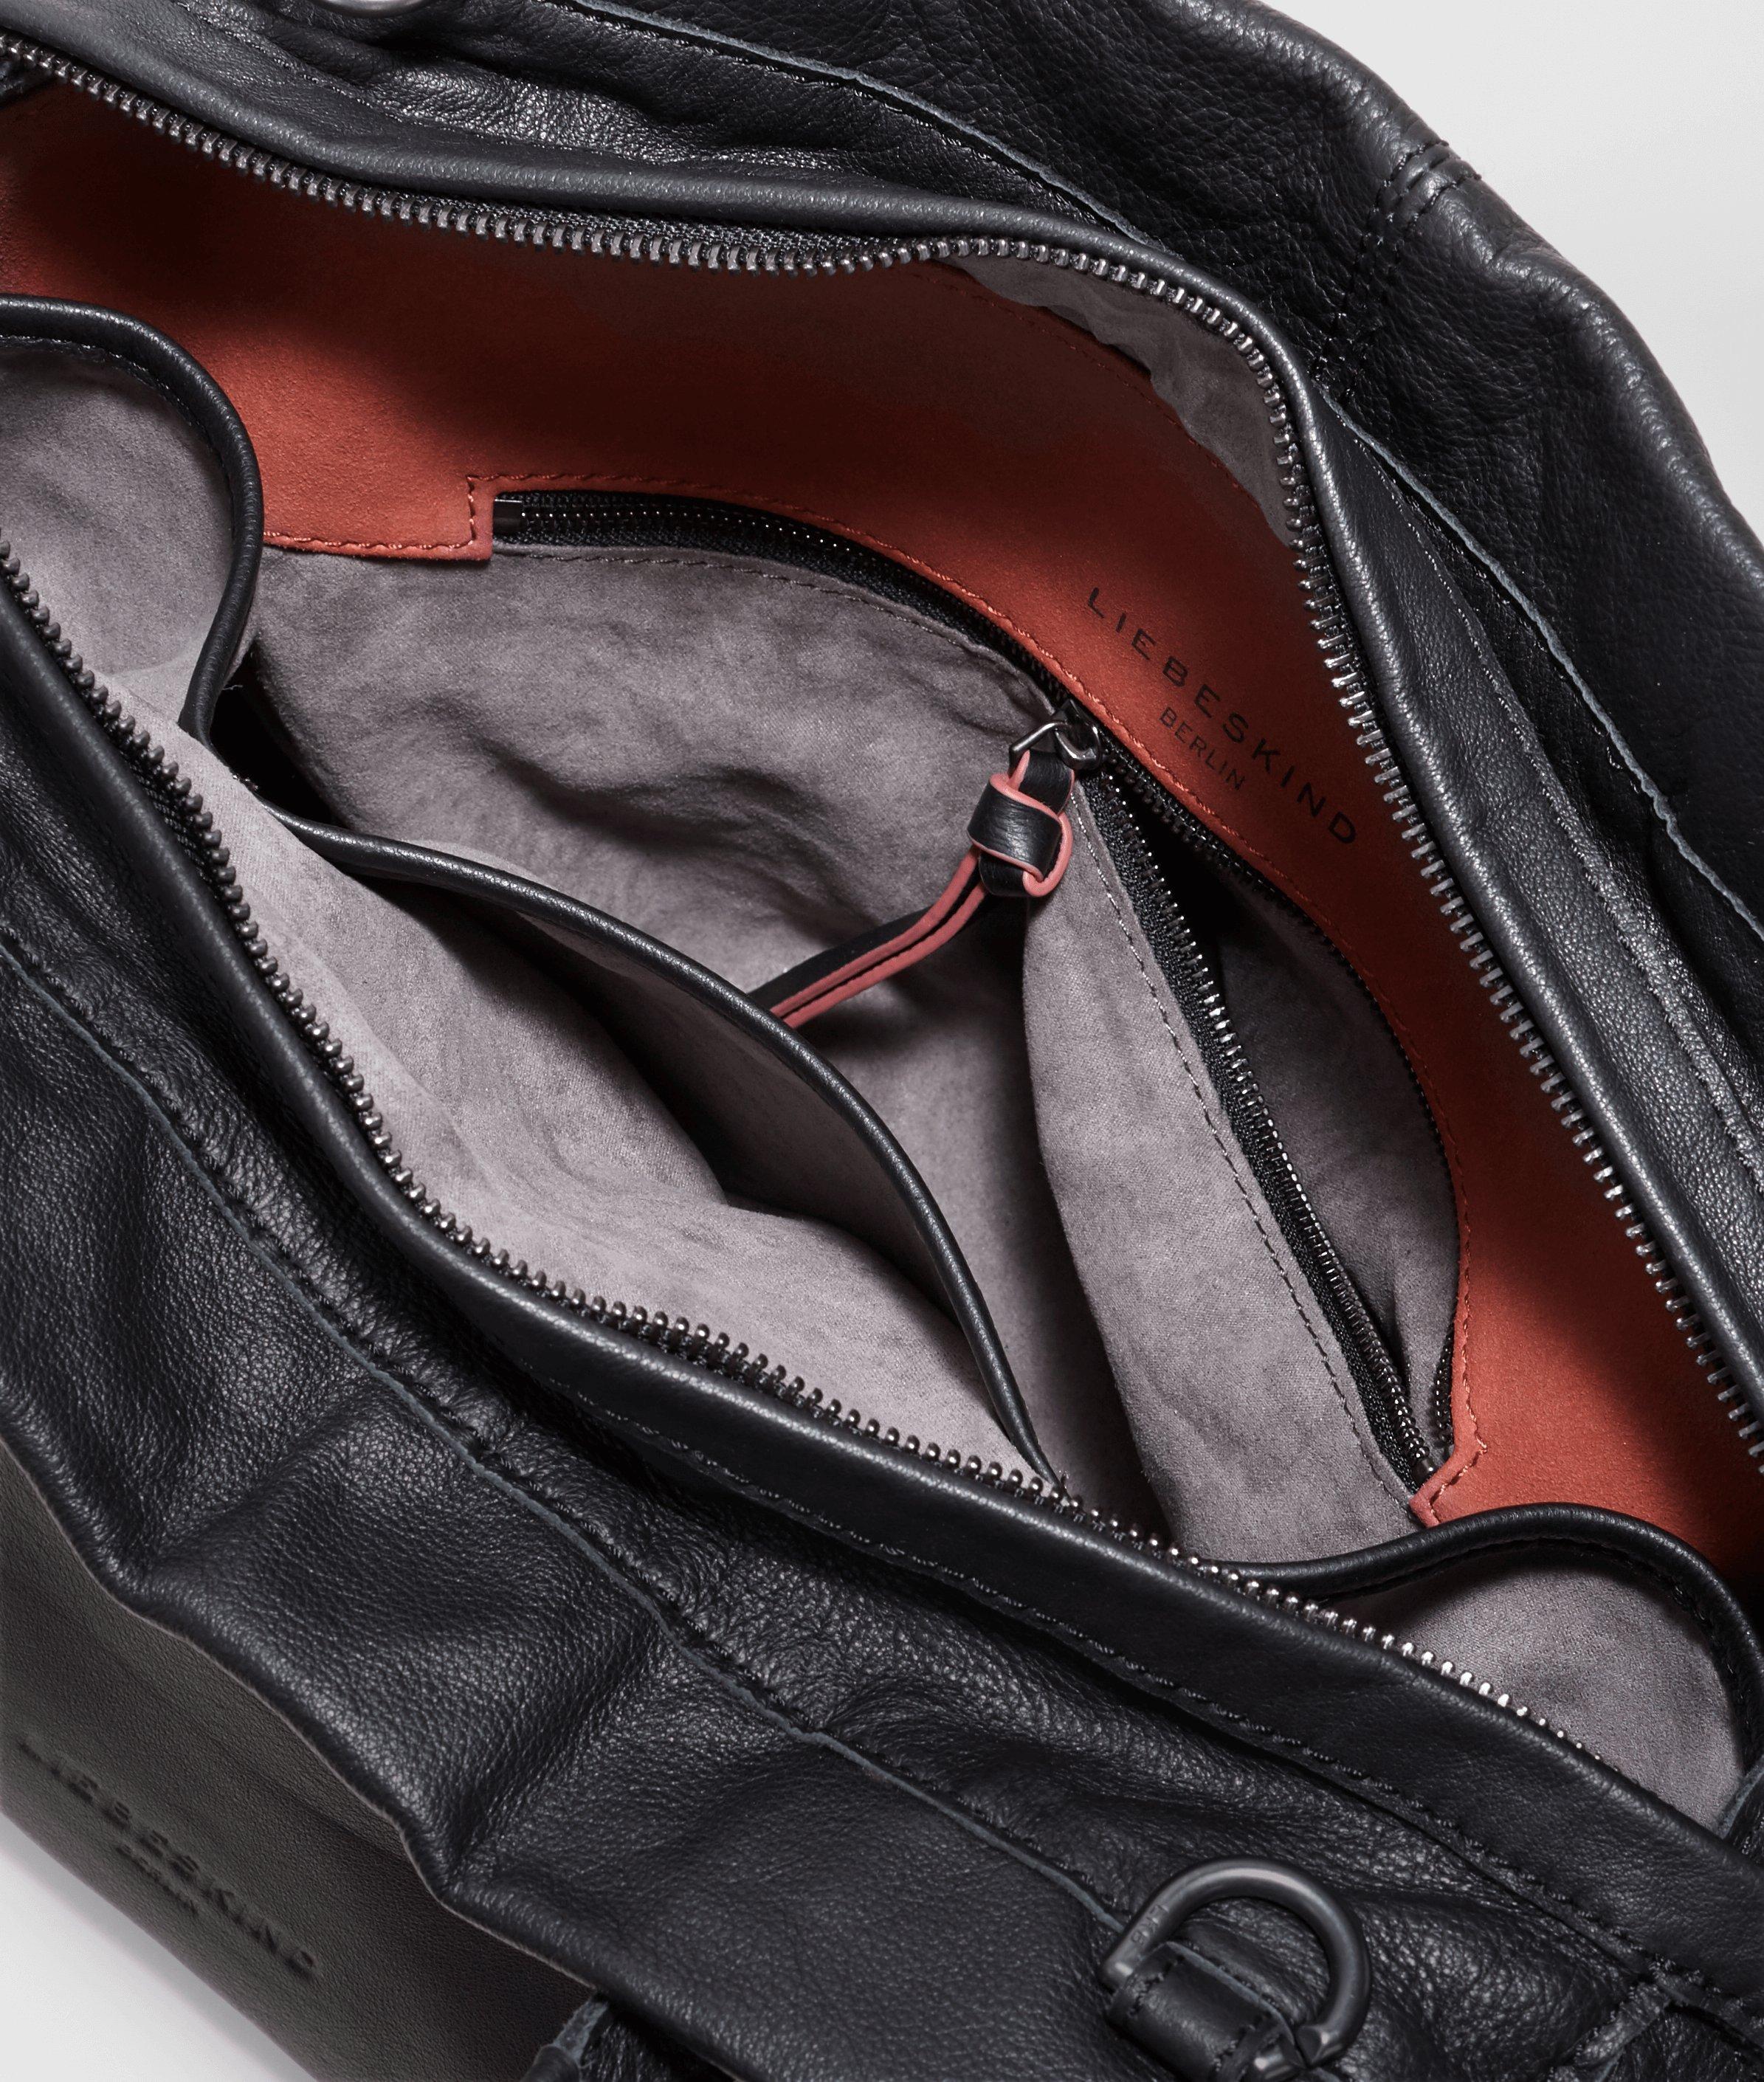 Handbag with an outer compartment | Liebeskind Berlin